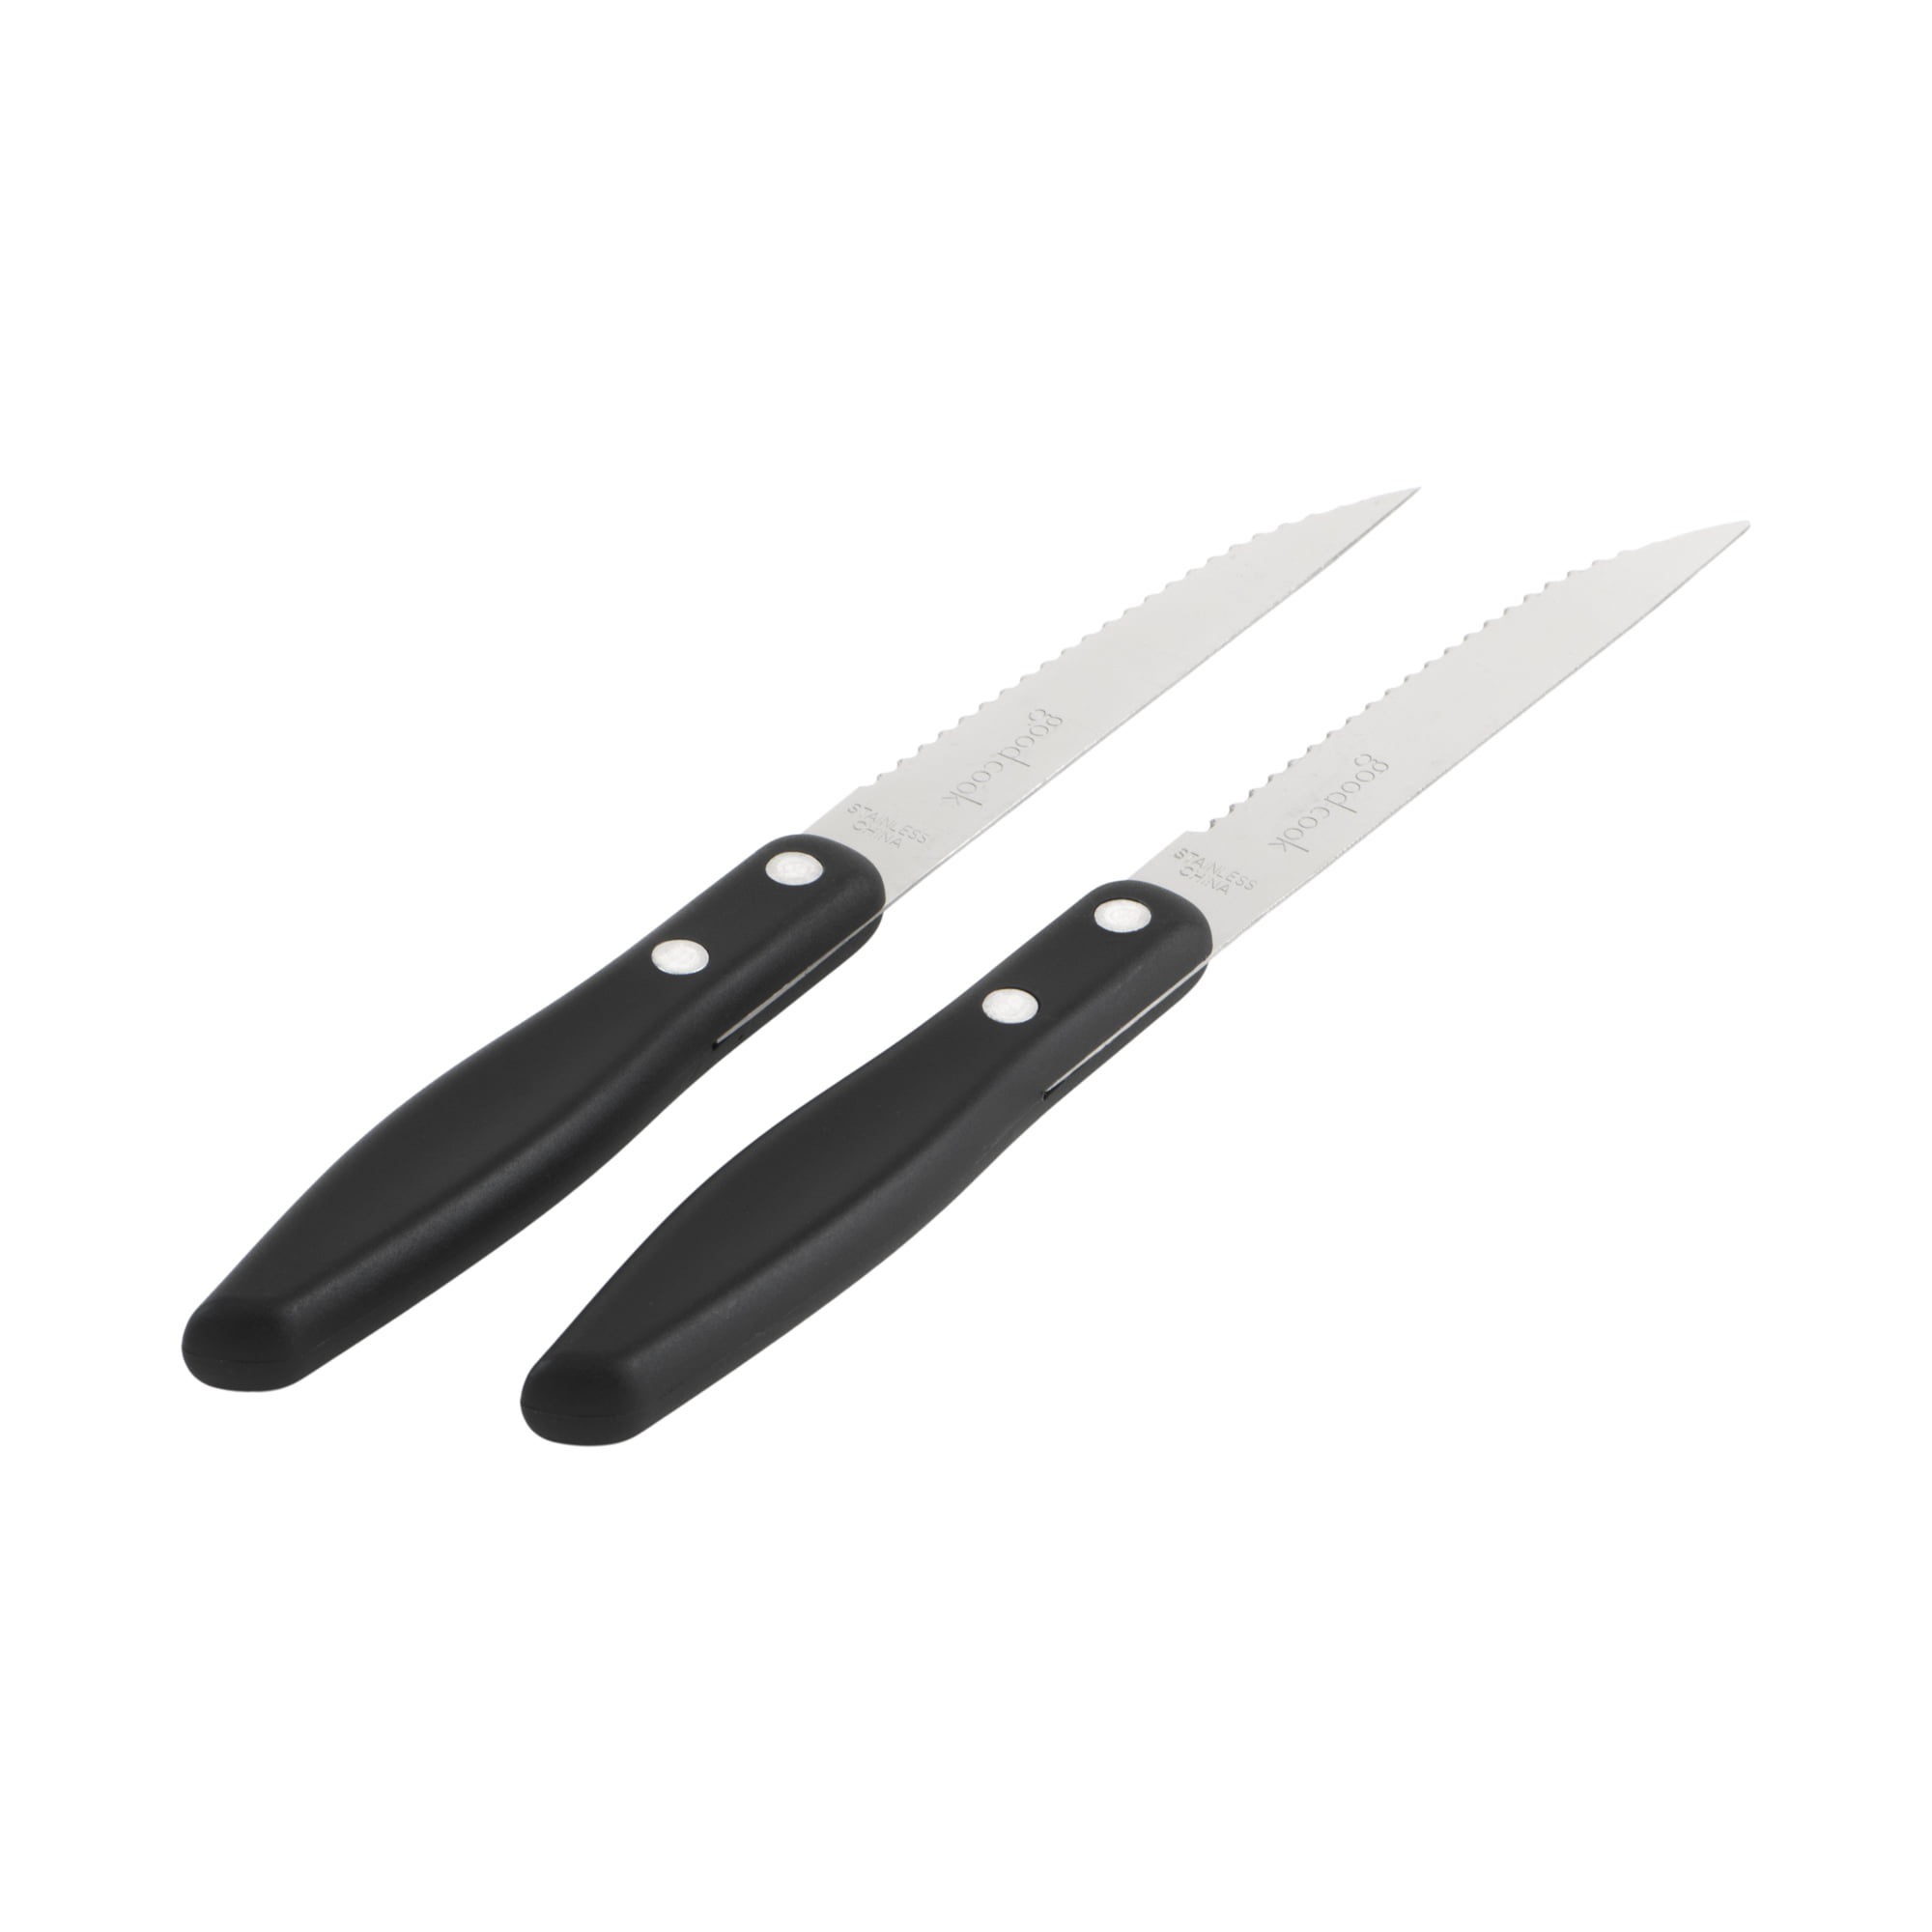 Goodcook Steak Knives, 4 Count